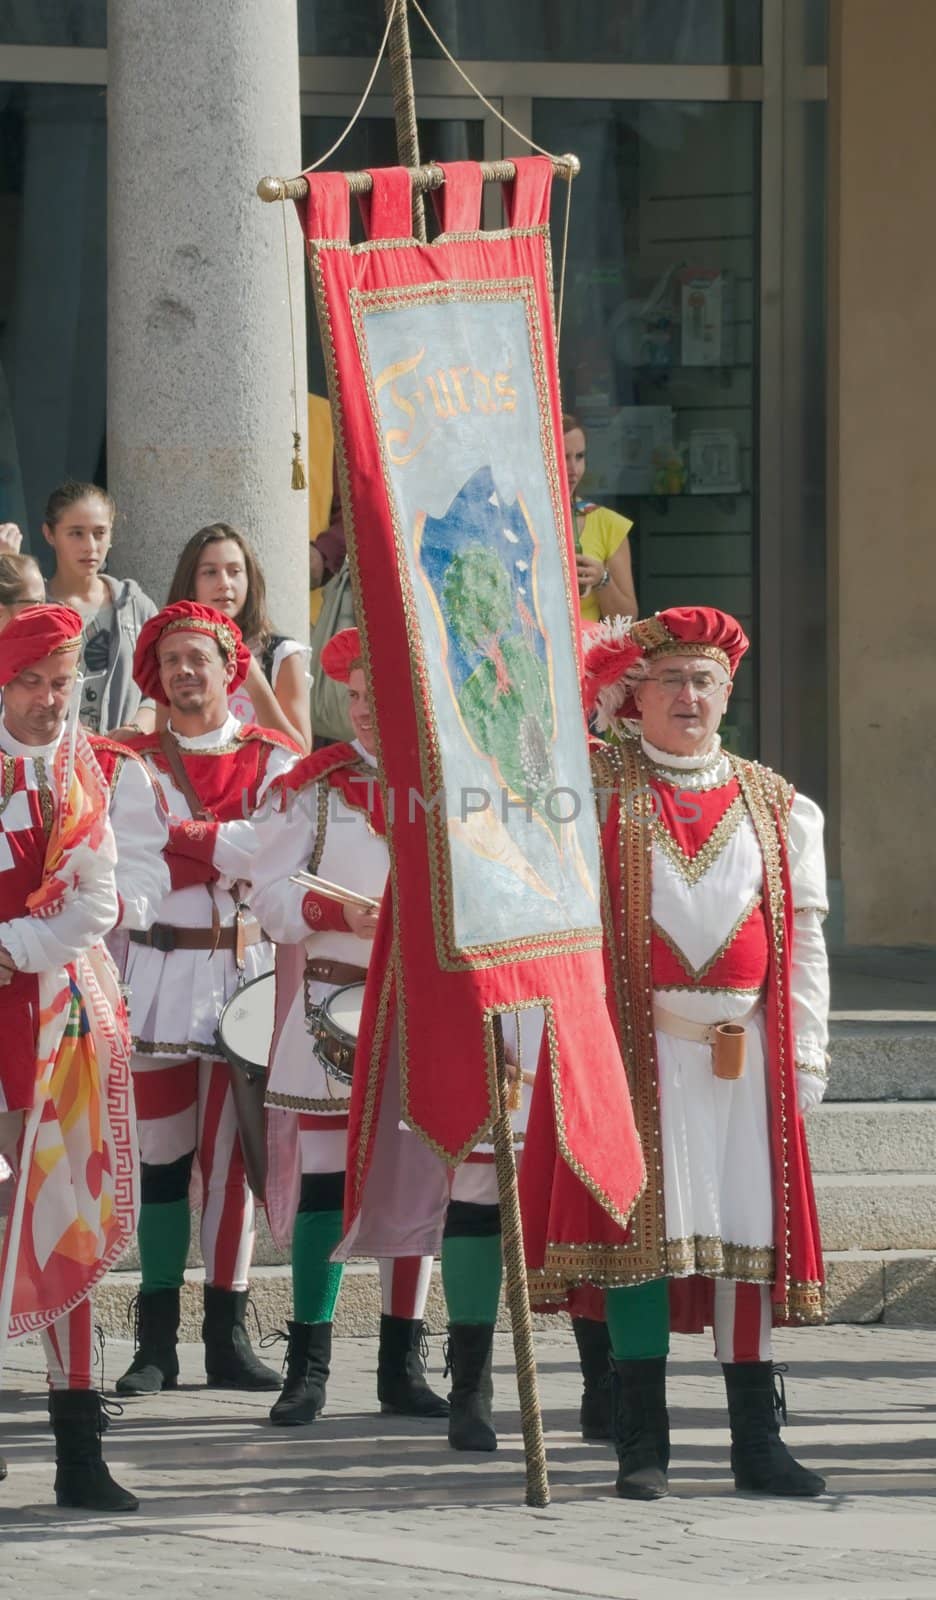 Participants of the National championship of the medieval flag bearers and musicians in Faenza, Italy